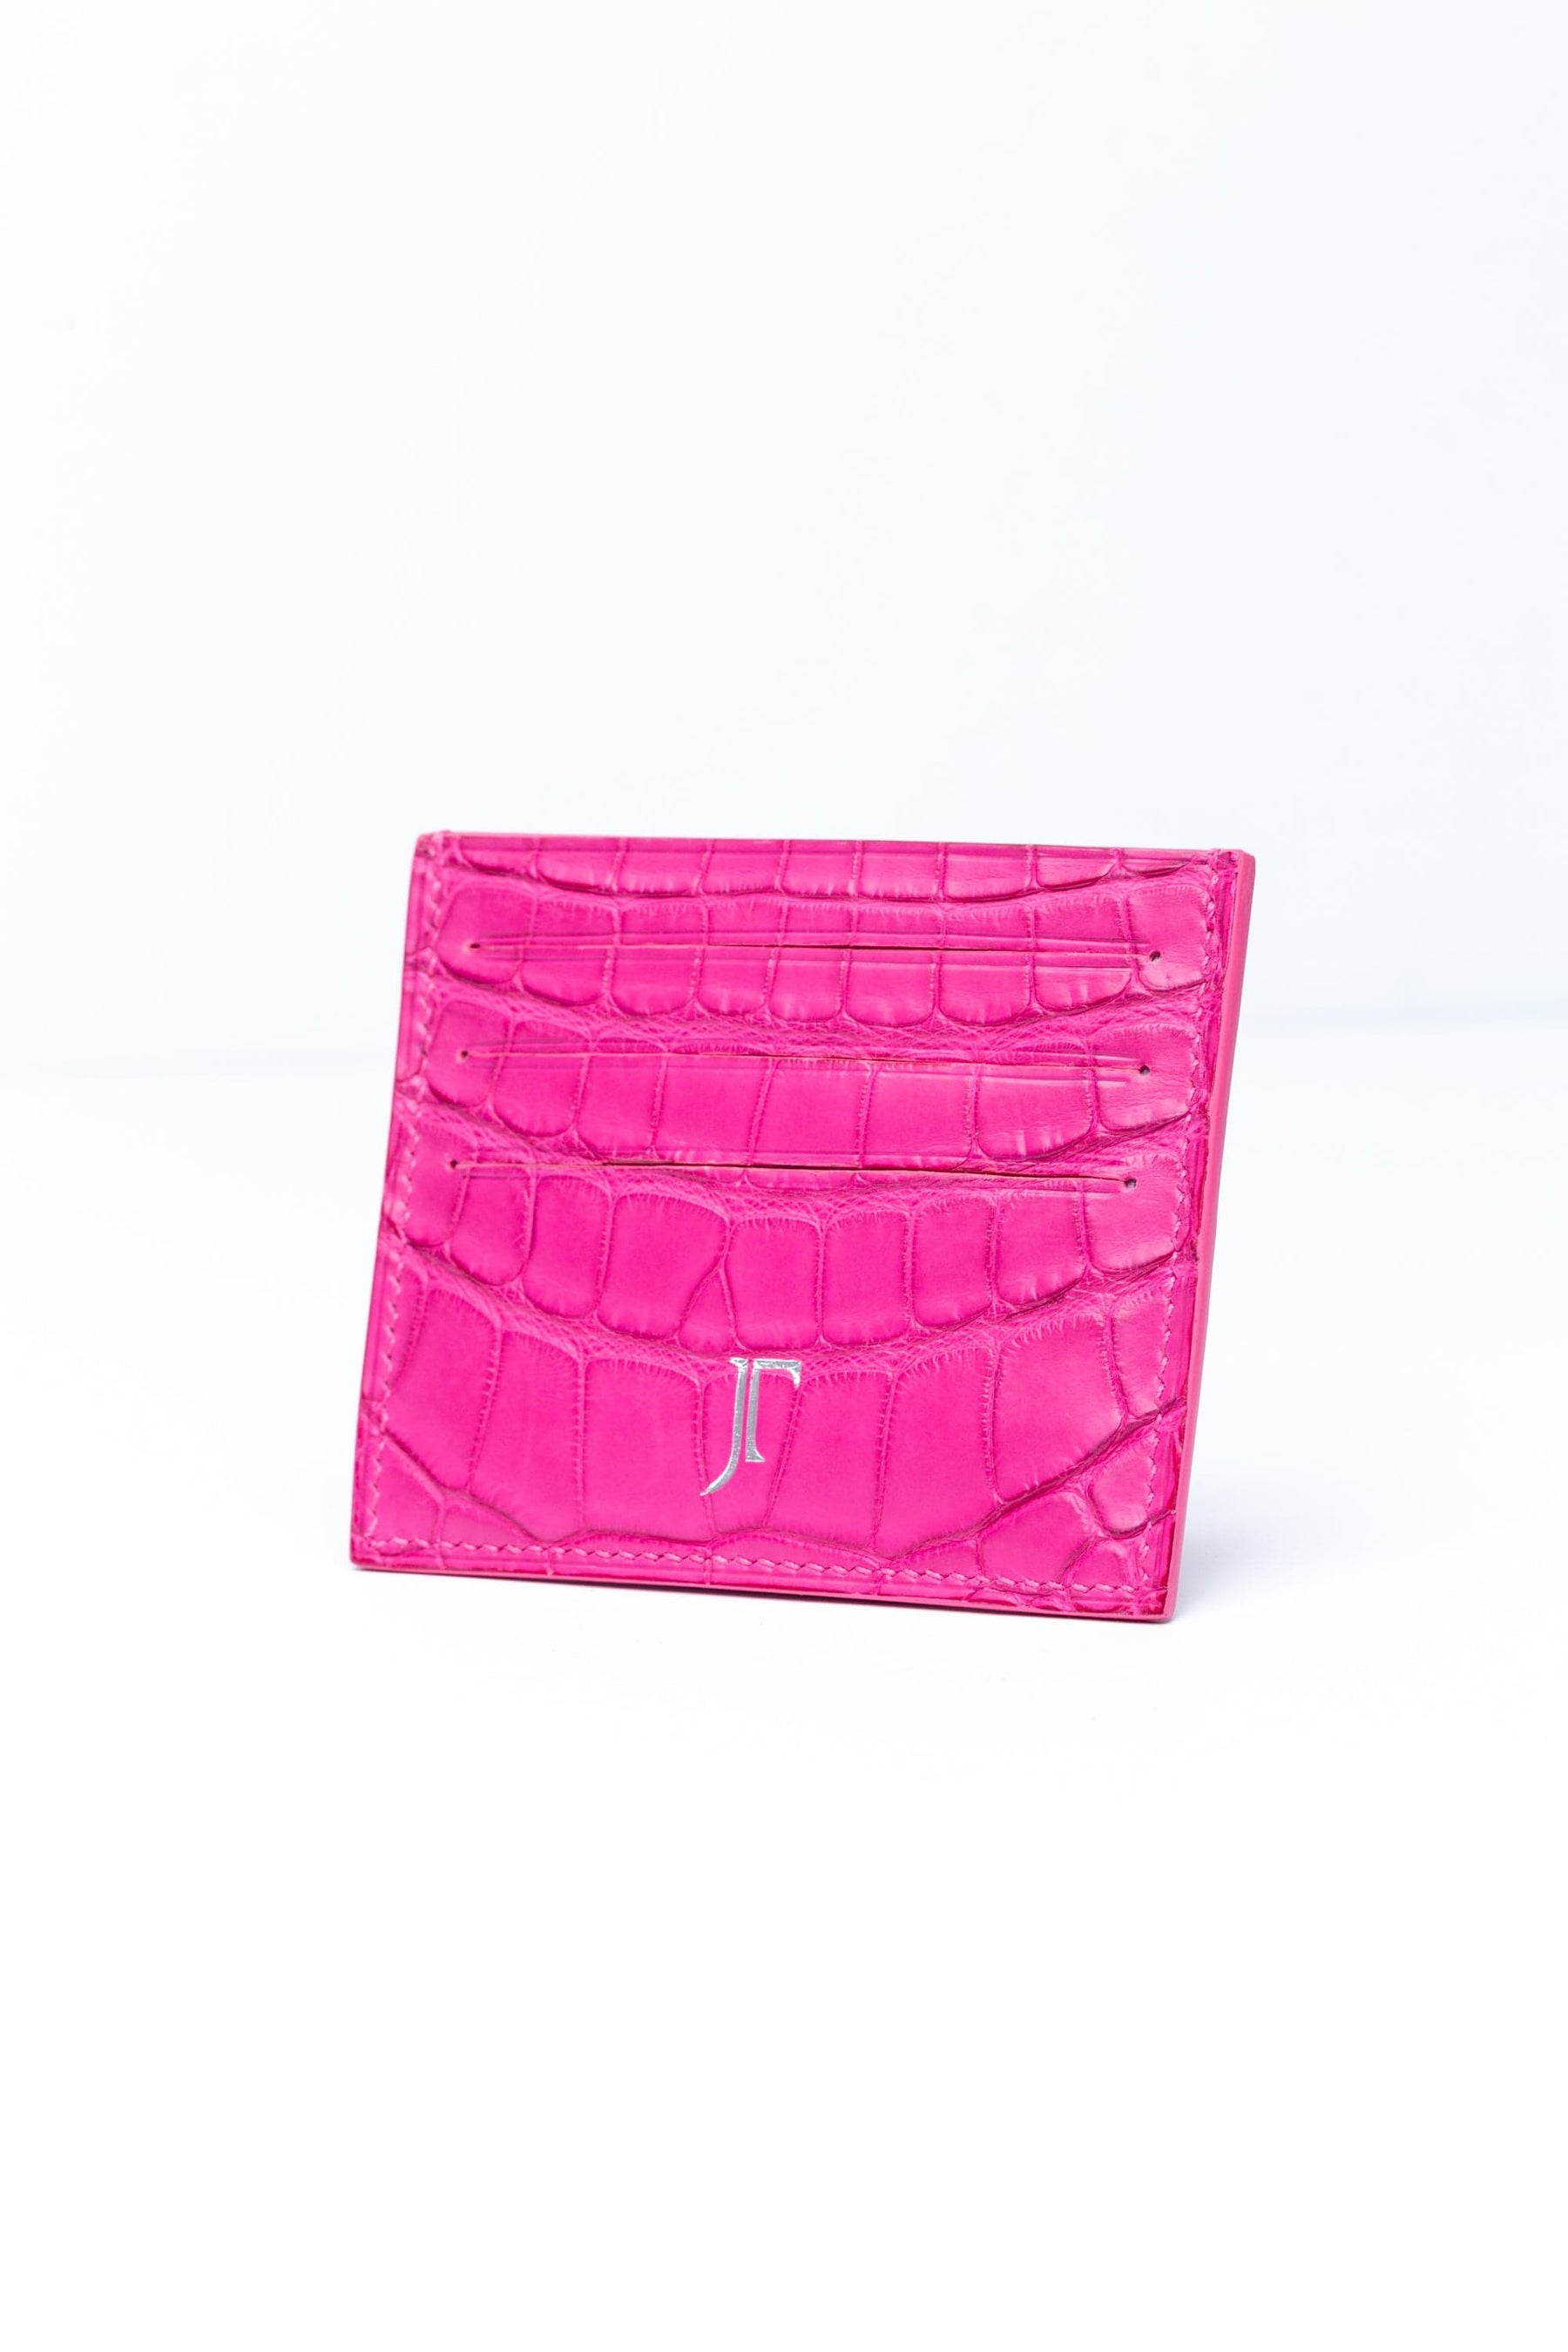 Tamagini Leather | The Endicott Card Wallet - Hot Pink Bungus Edition